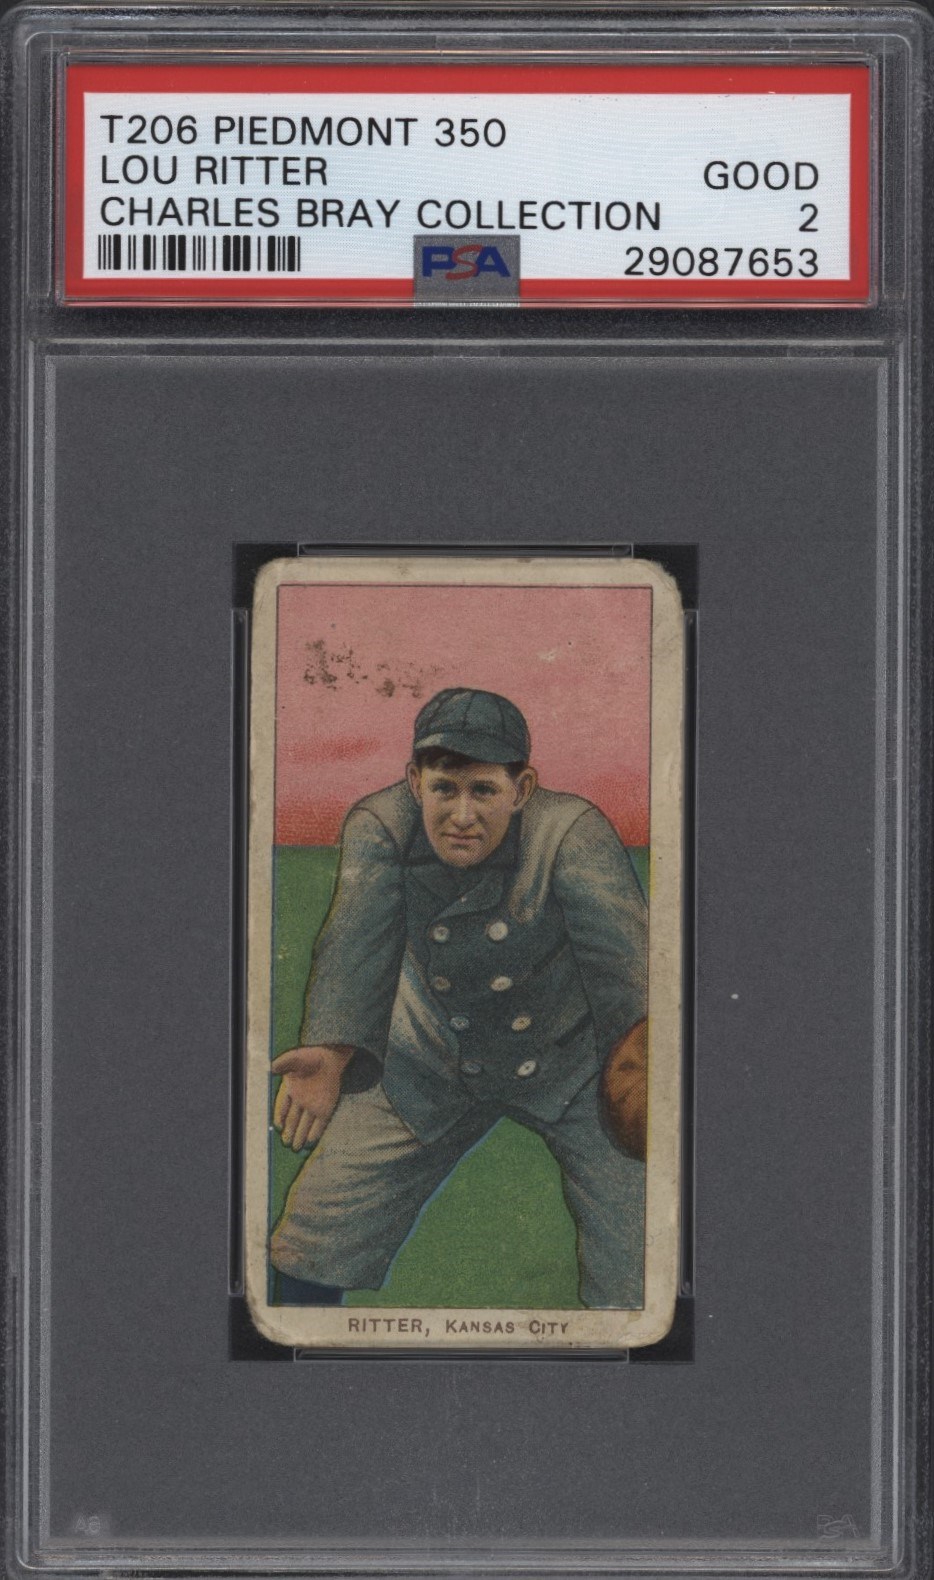 Baseball and Trading Cards - T206 Piedmont 350 Lou Ritter PSA 2 From the Charles Bray Collection